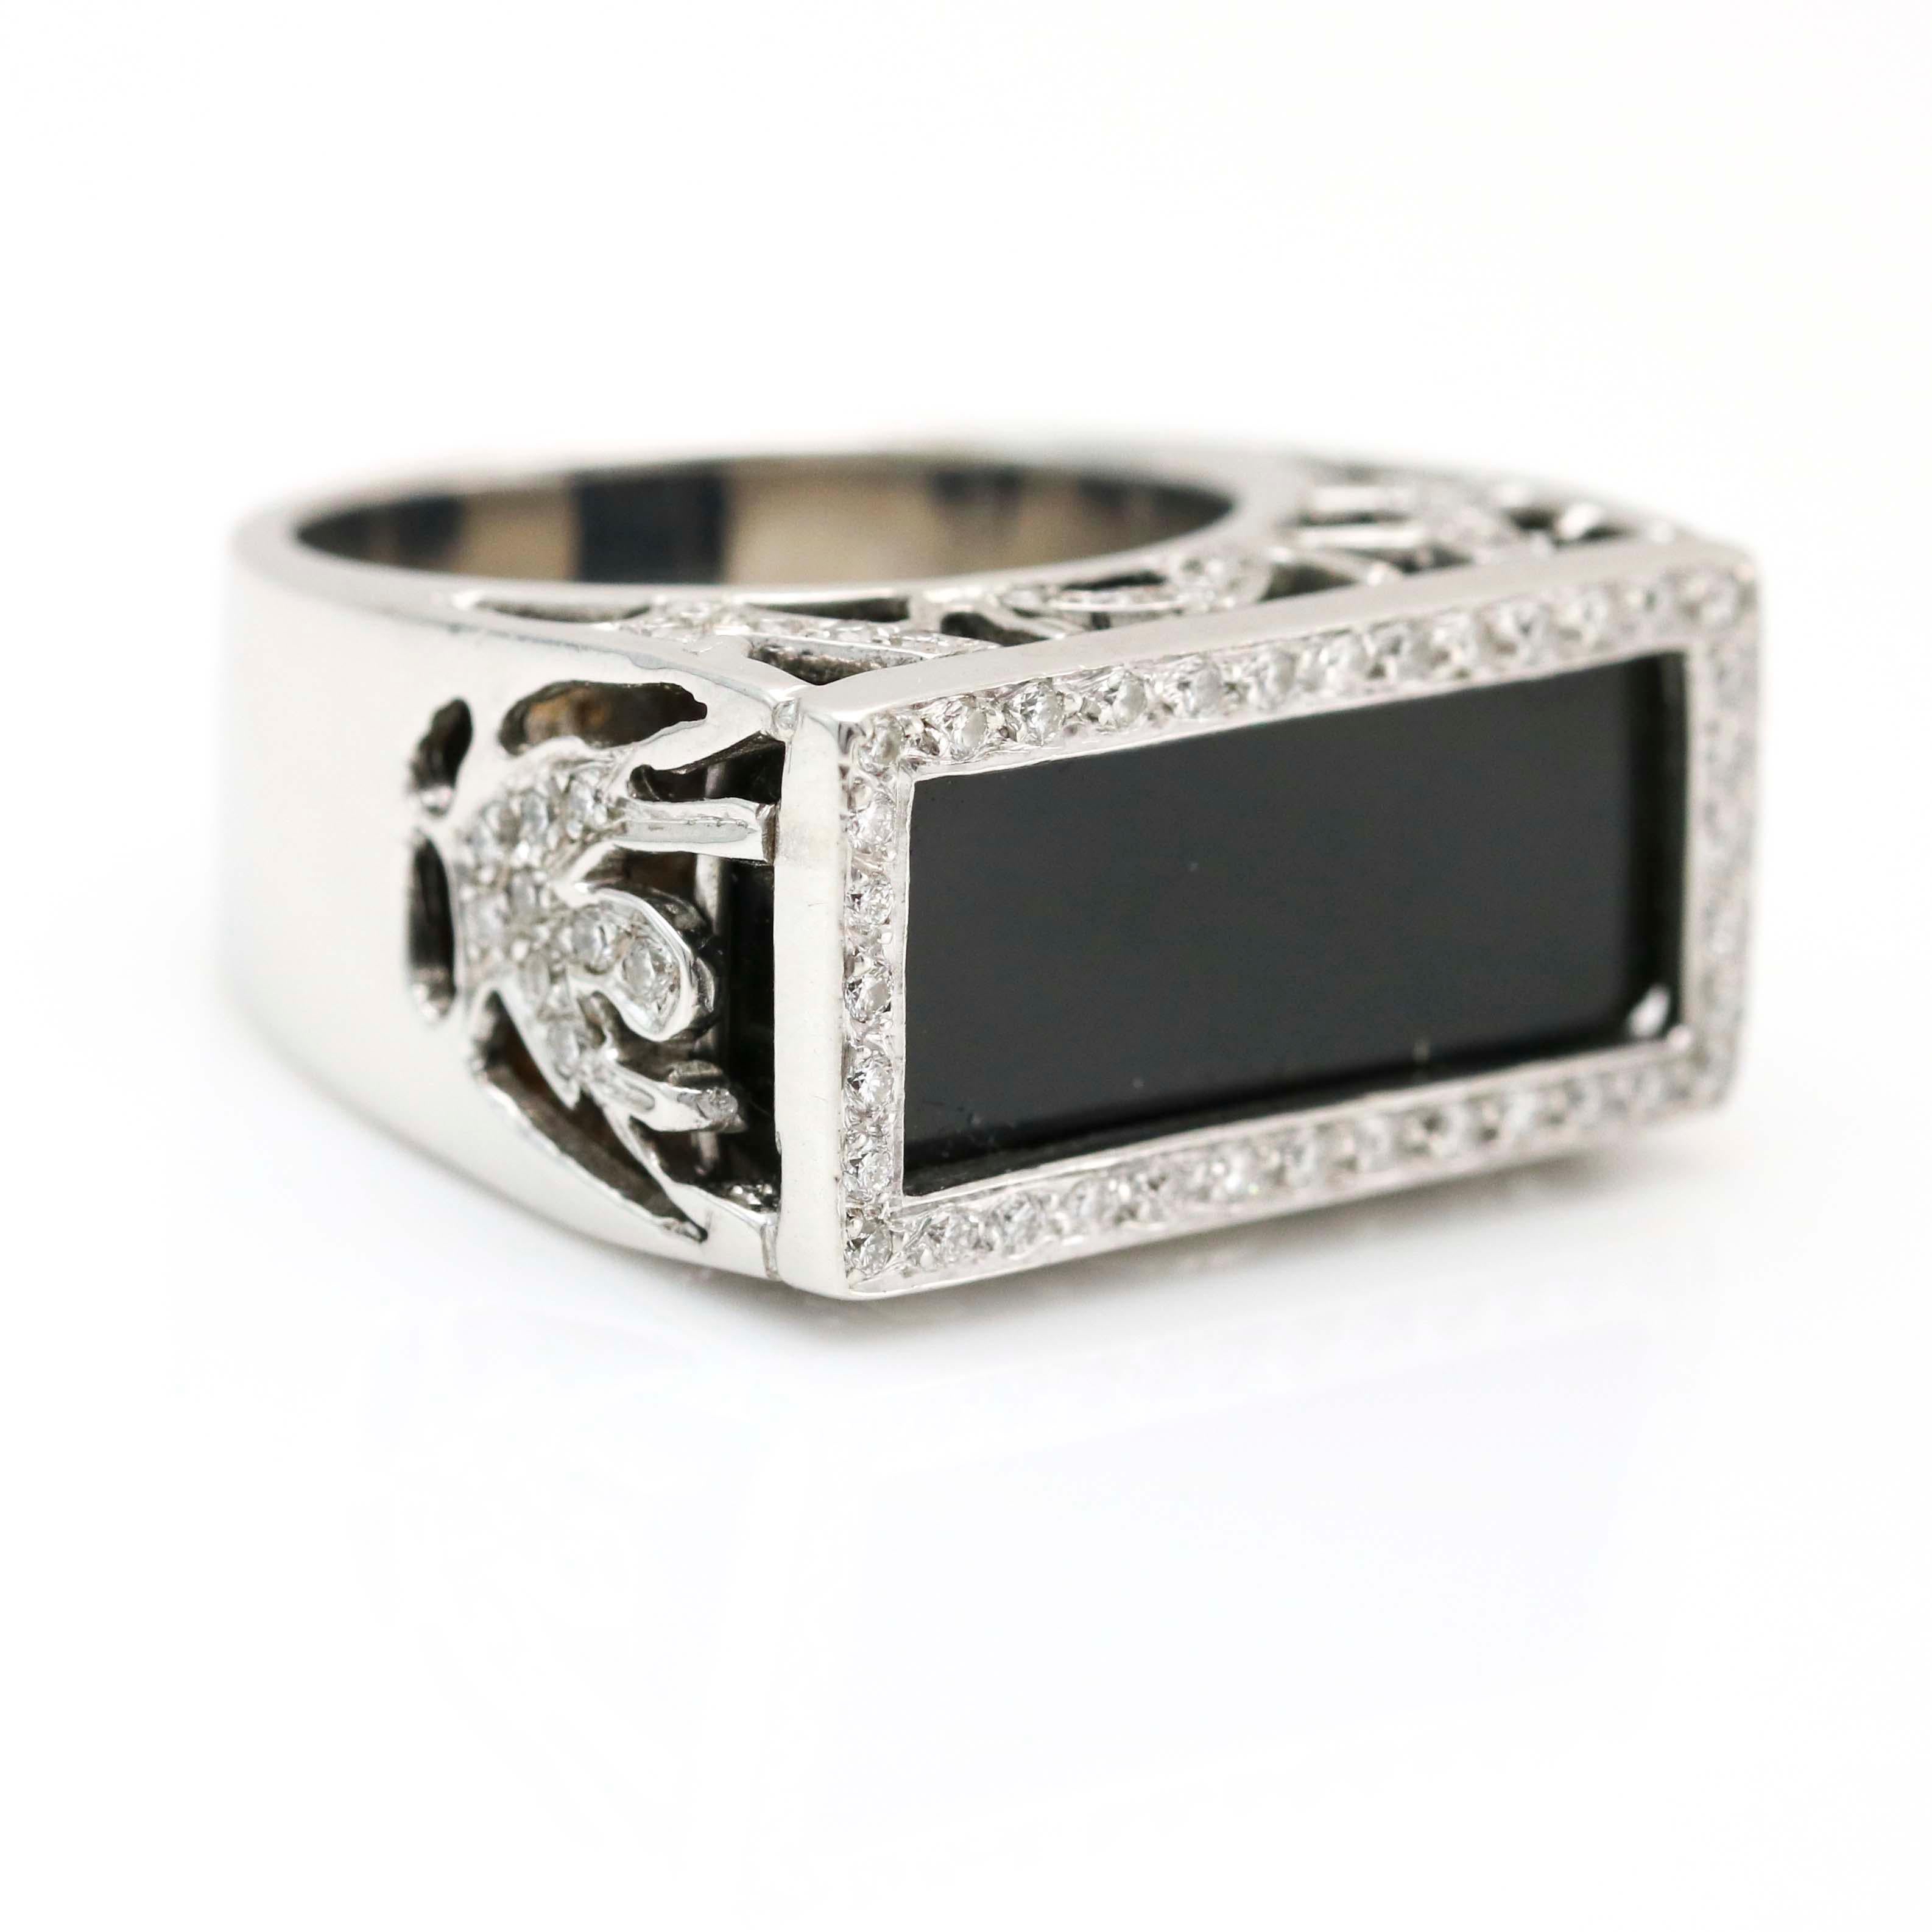 Rectangular black onyx ring with diamonds crafted in 18 karat white gold. Size 7. Signed SiNDi. Diamond carat total weight, 1.10 carats,

Width, 12mm. Weight, 18 grams. Carat total weight, 1.1 carats. 